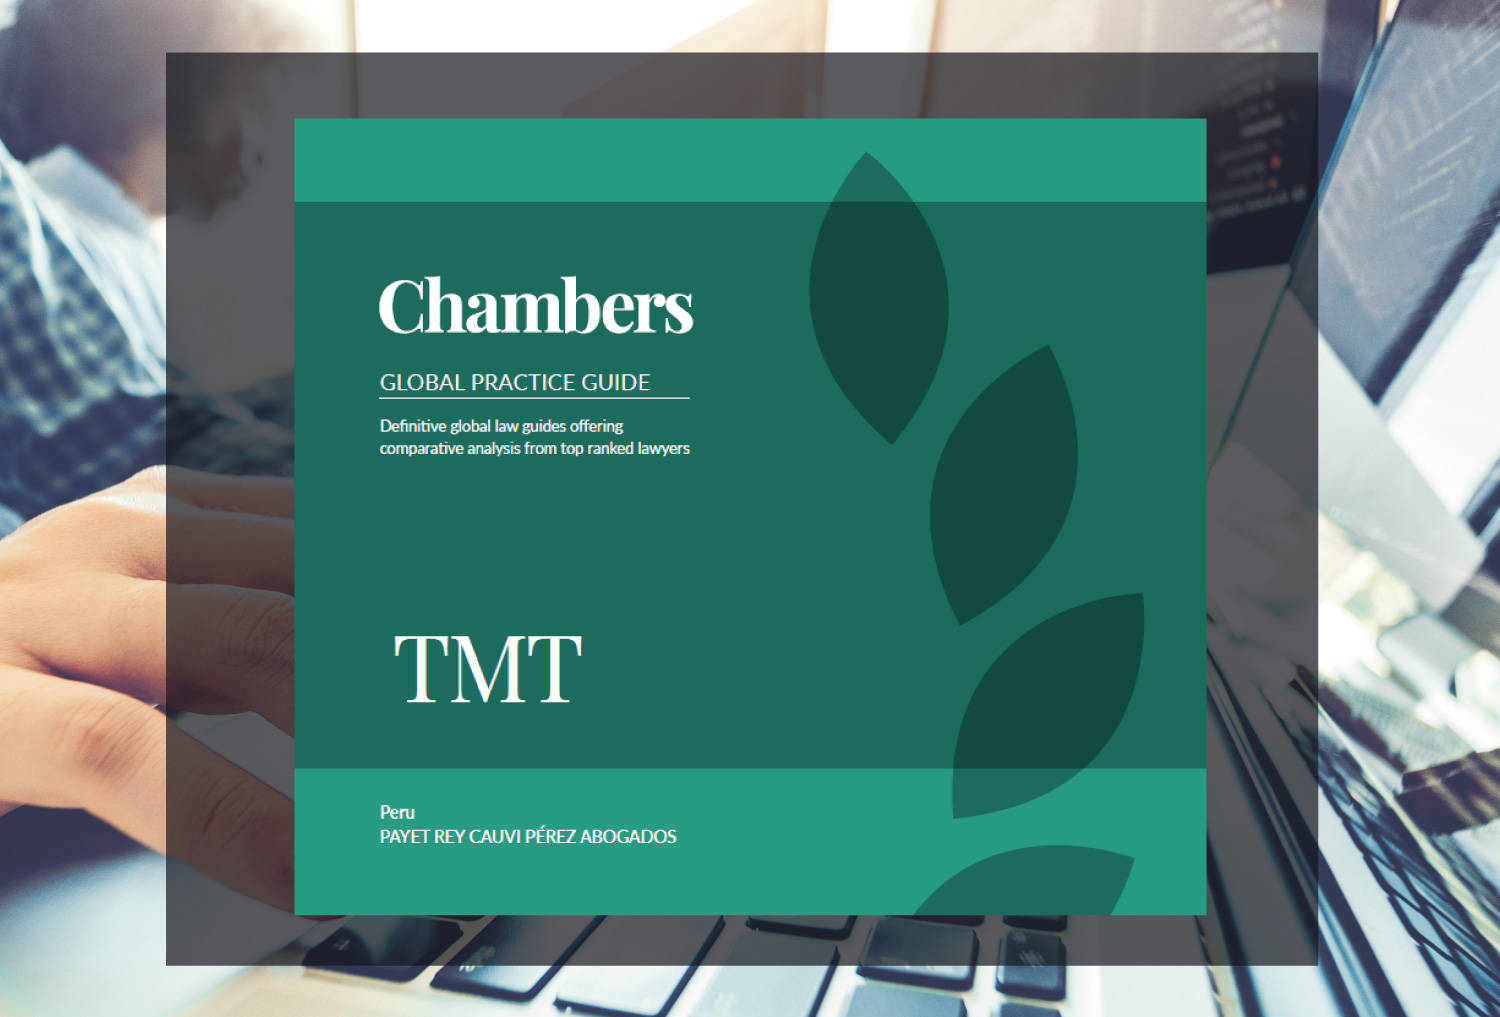 Gerardo Soto and Sebastian Gamarra collaborated on the Chambers Global Practice Guide 2019: “TMT”